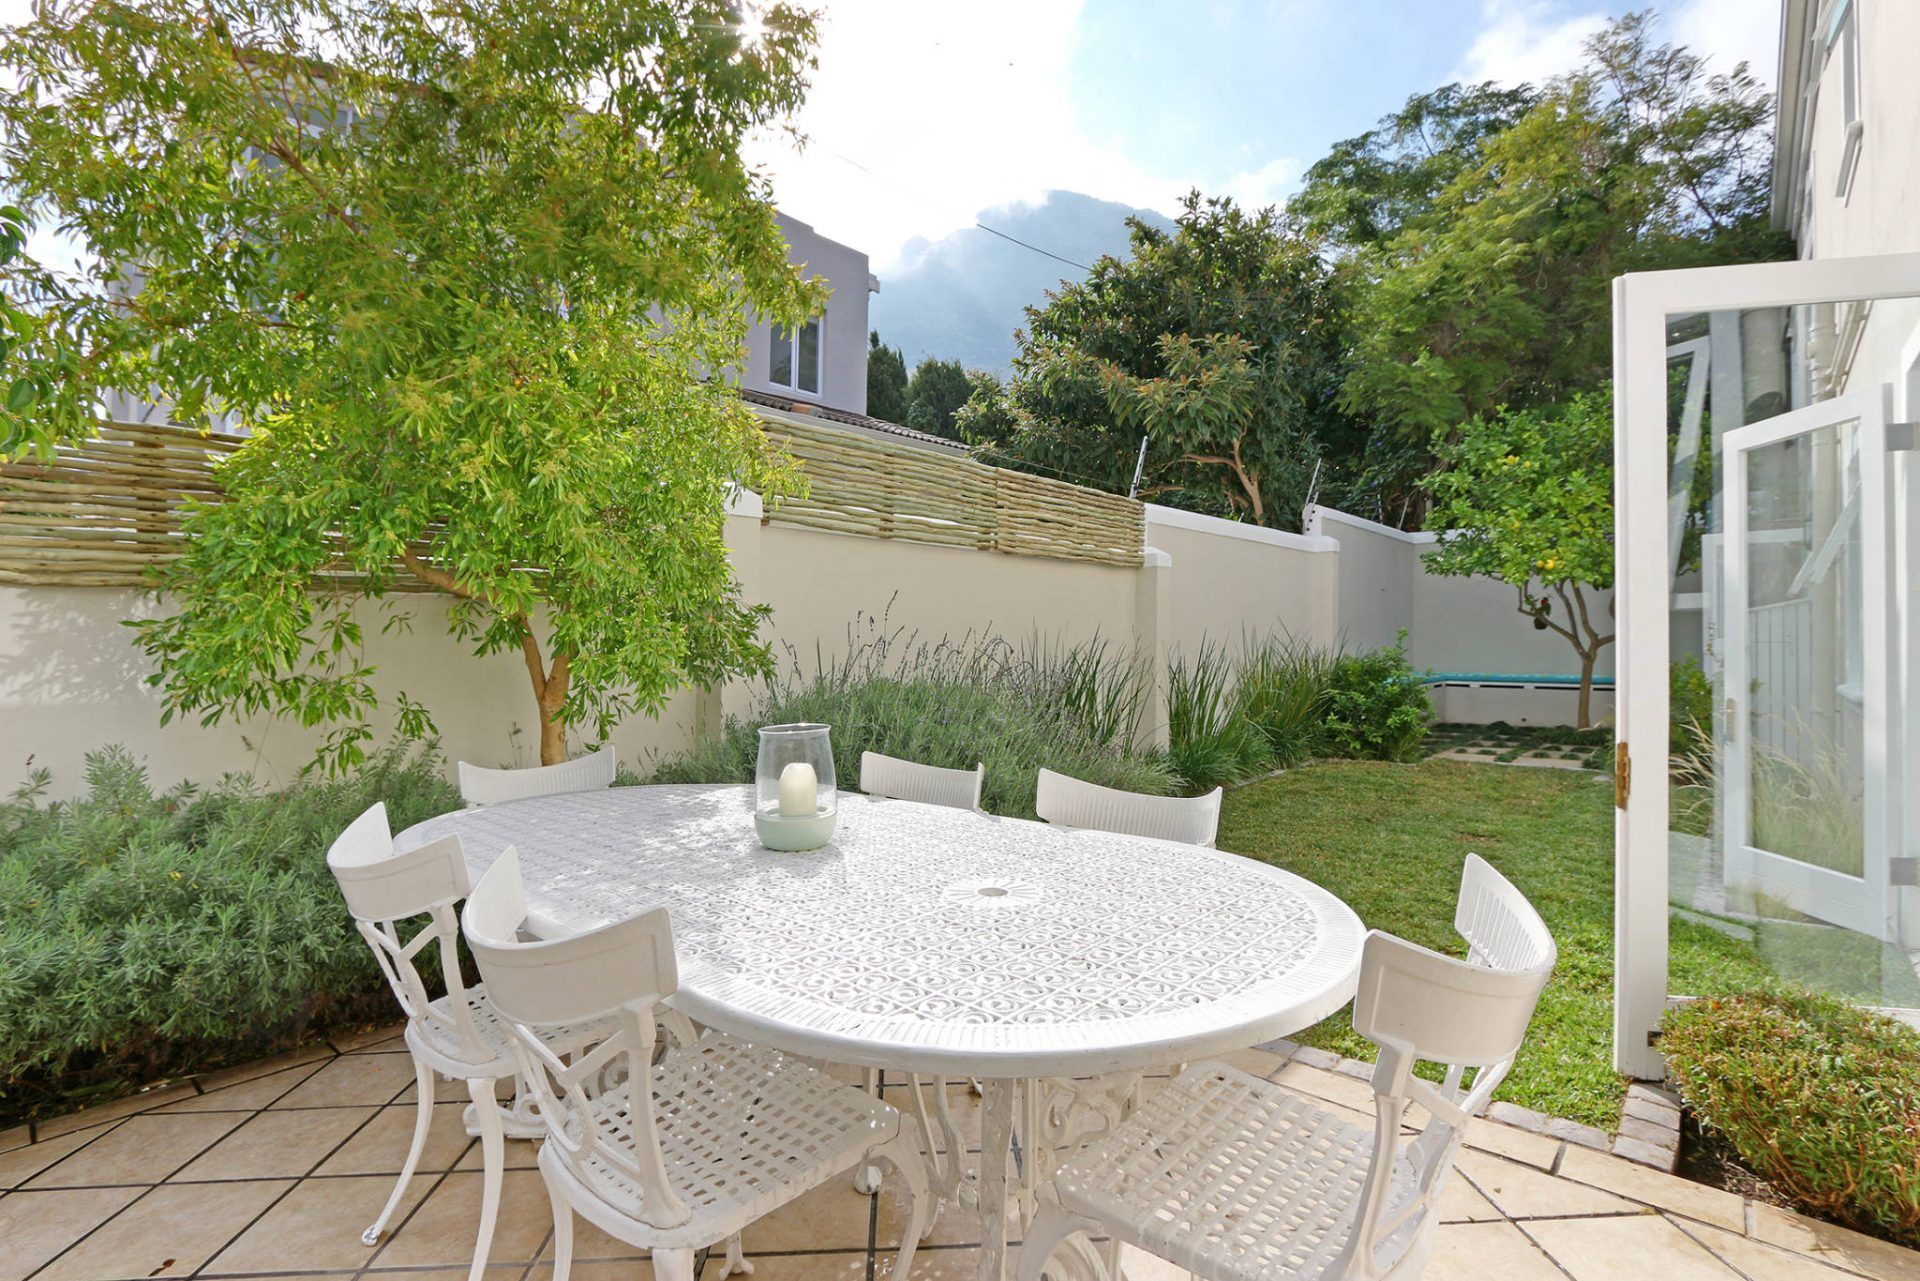 Photo 10 of King Street Villa accommodation in Hout Bay, Cape Town with 3 bedrooms and 2 bathrooms